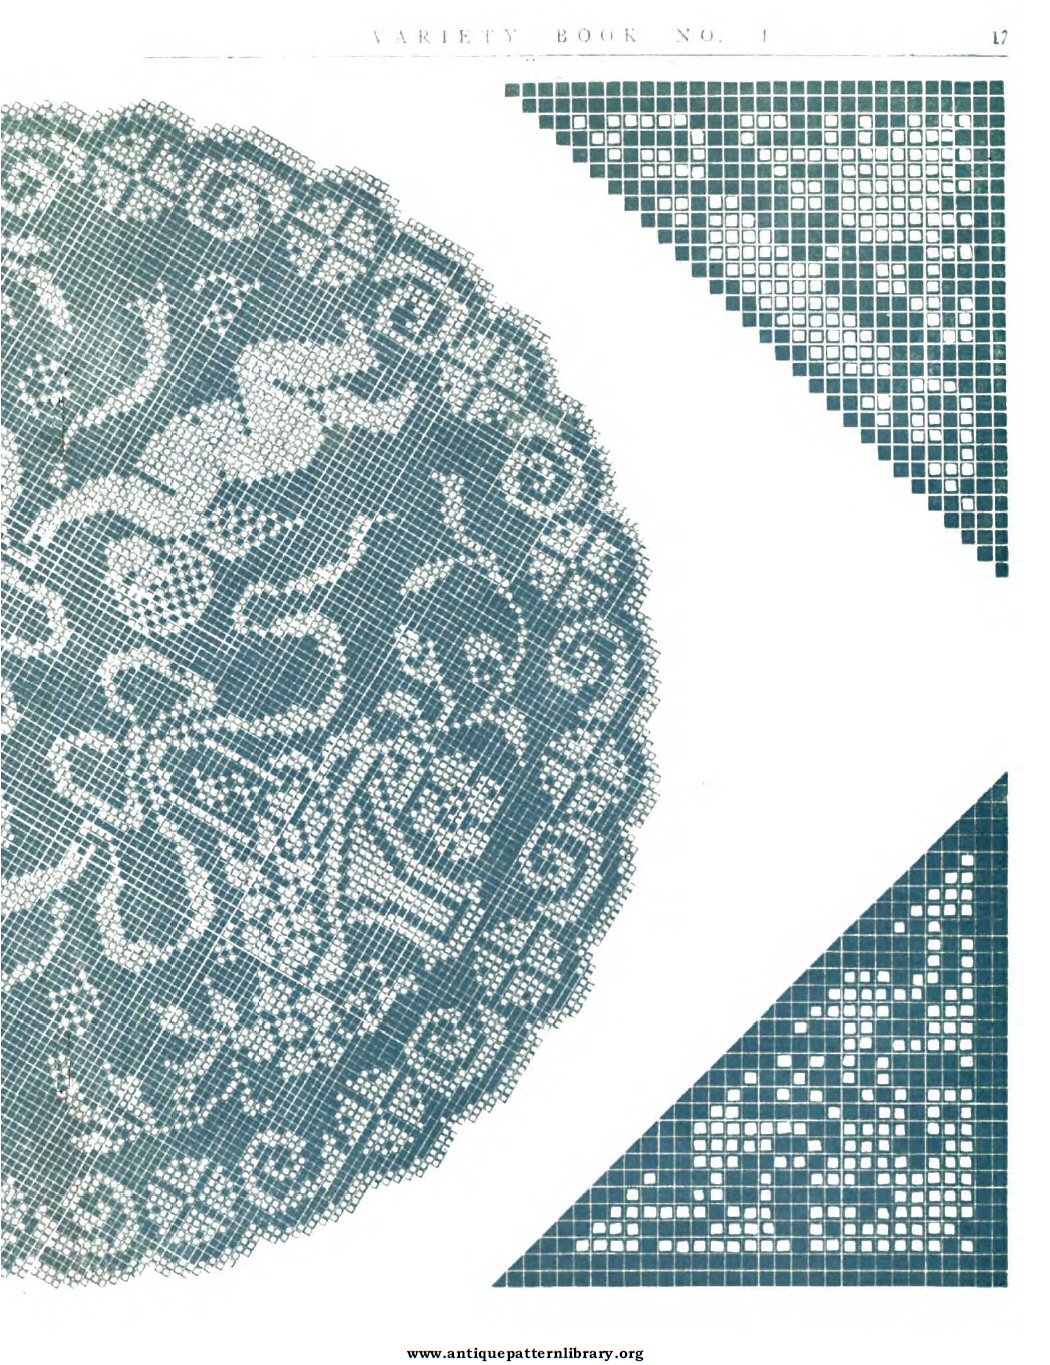 6-DA009 Variety Italian Cut Work and Filet Lace Book No. 1.